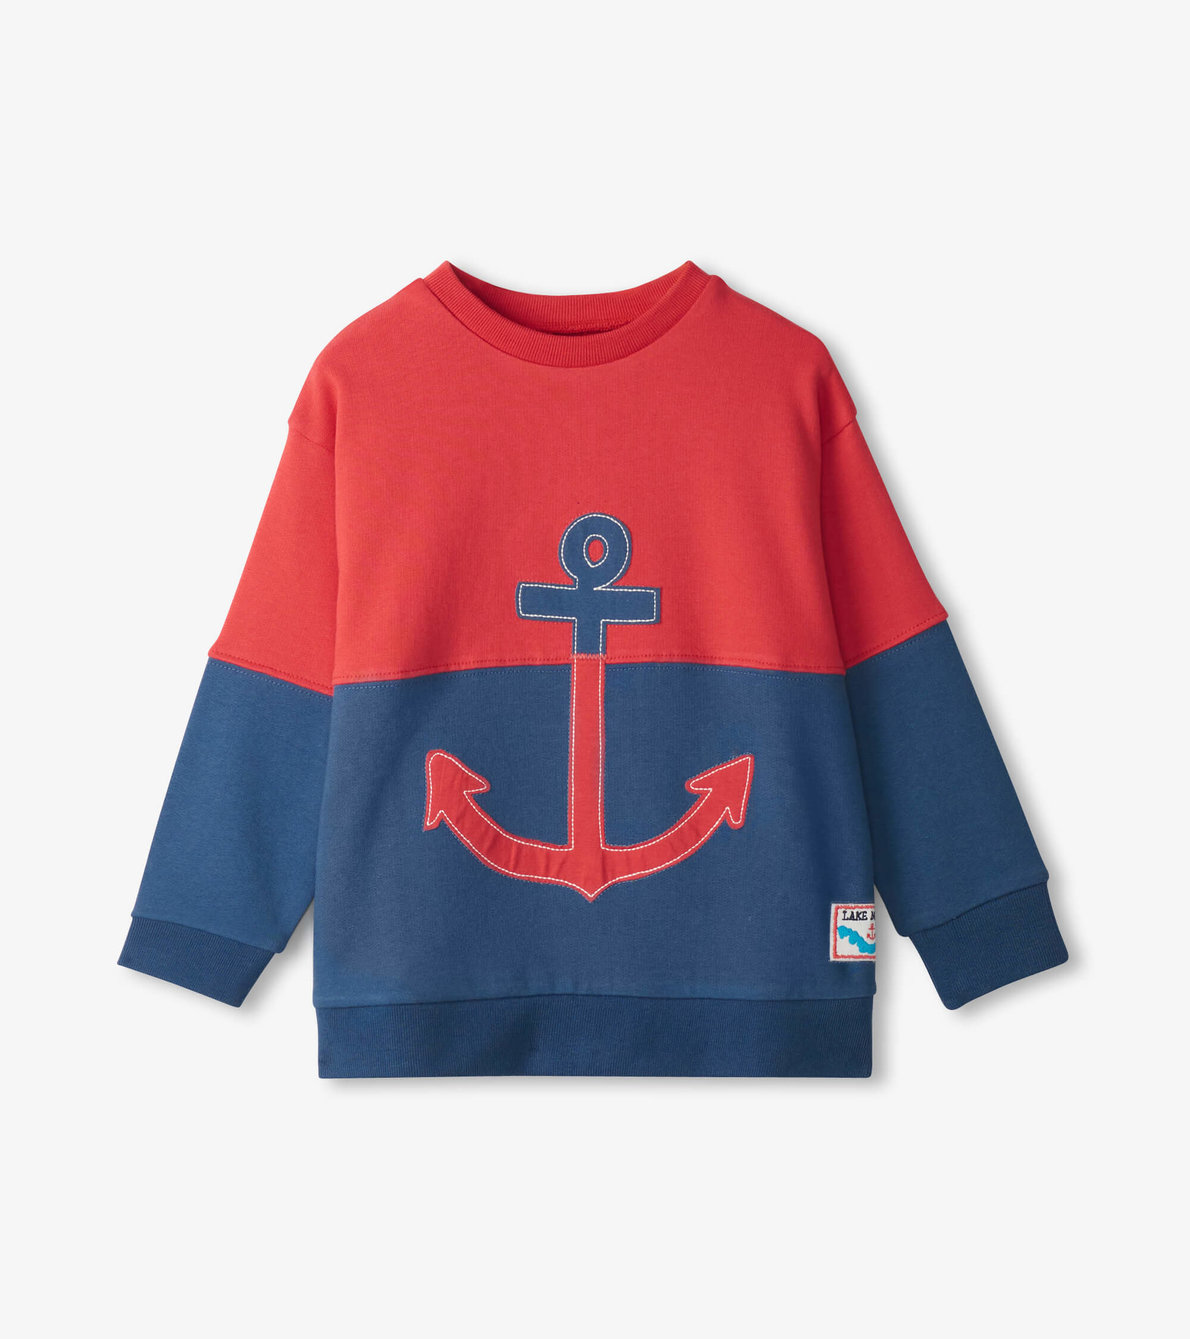 View larger image of Boys Colour Block Anchor Pullover Sweatshirt